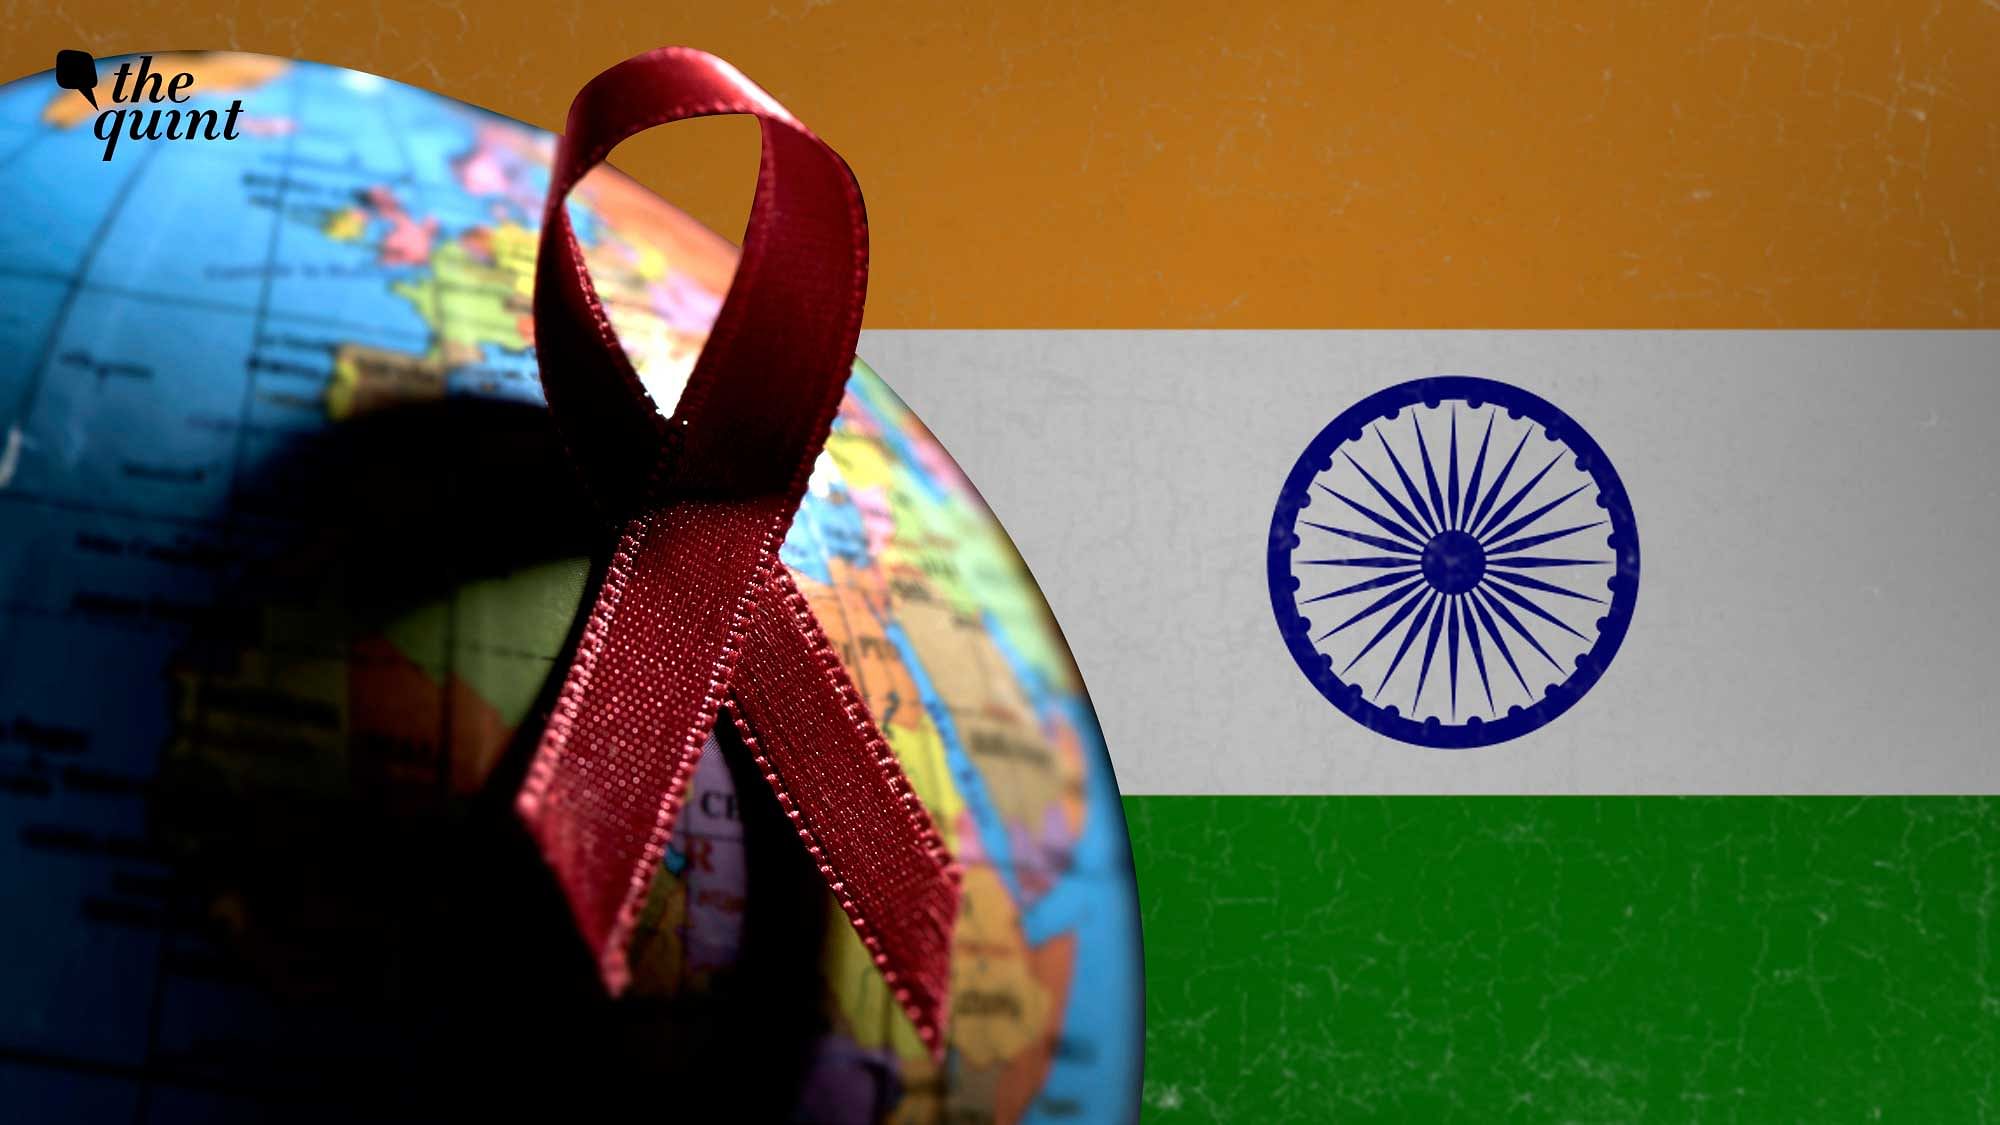 Image of Indian flag and AIDS fight symbol used for representation.